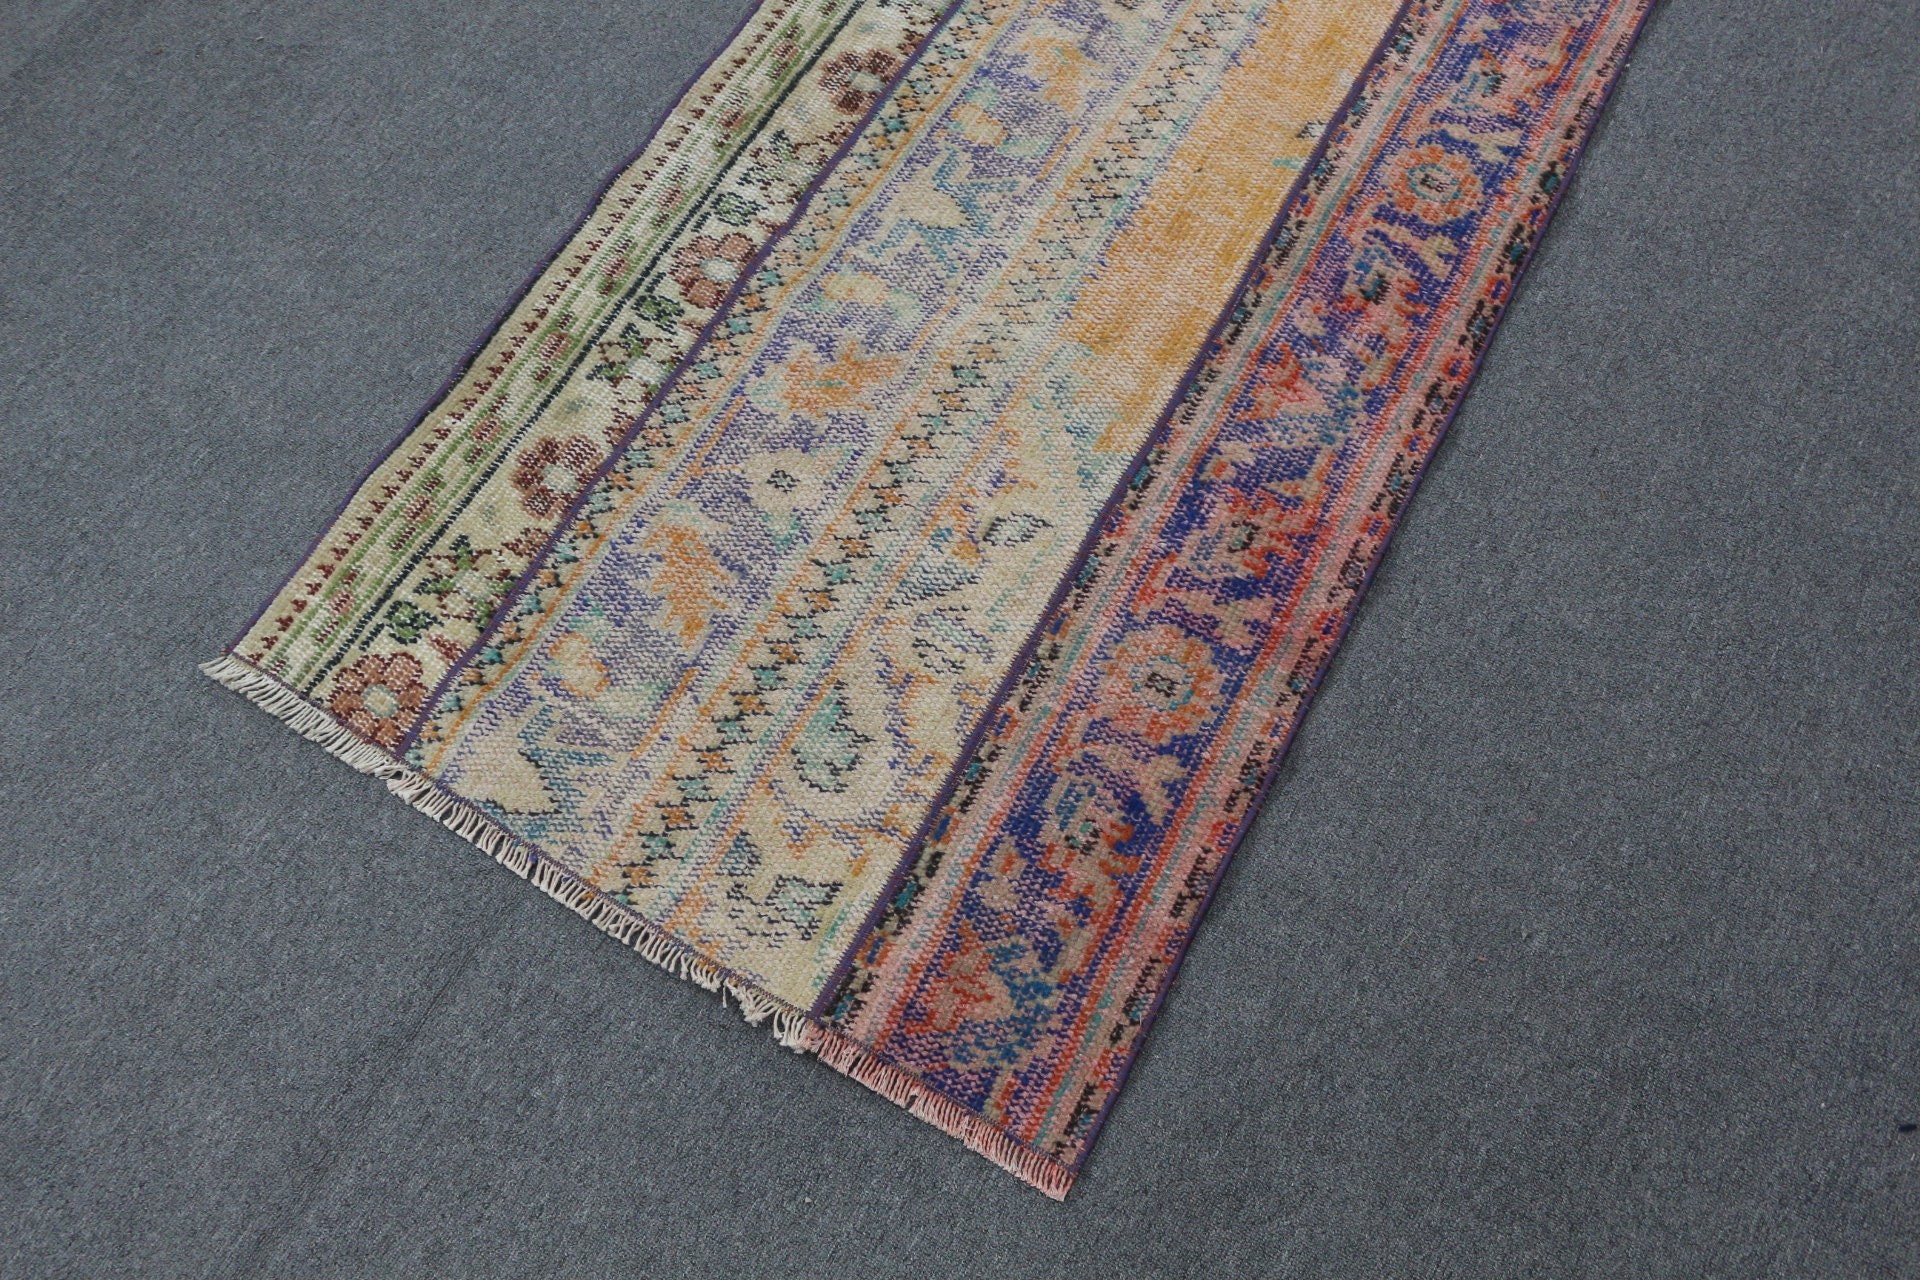 2.6x7.6 ft Runner Rugs, Rugs for Stair, Old Rug, Turkish Rug, Vintage Rugs, Hallway Rug, Home Decor Rug, Blue Kitchen Rugs